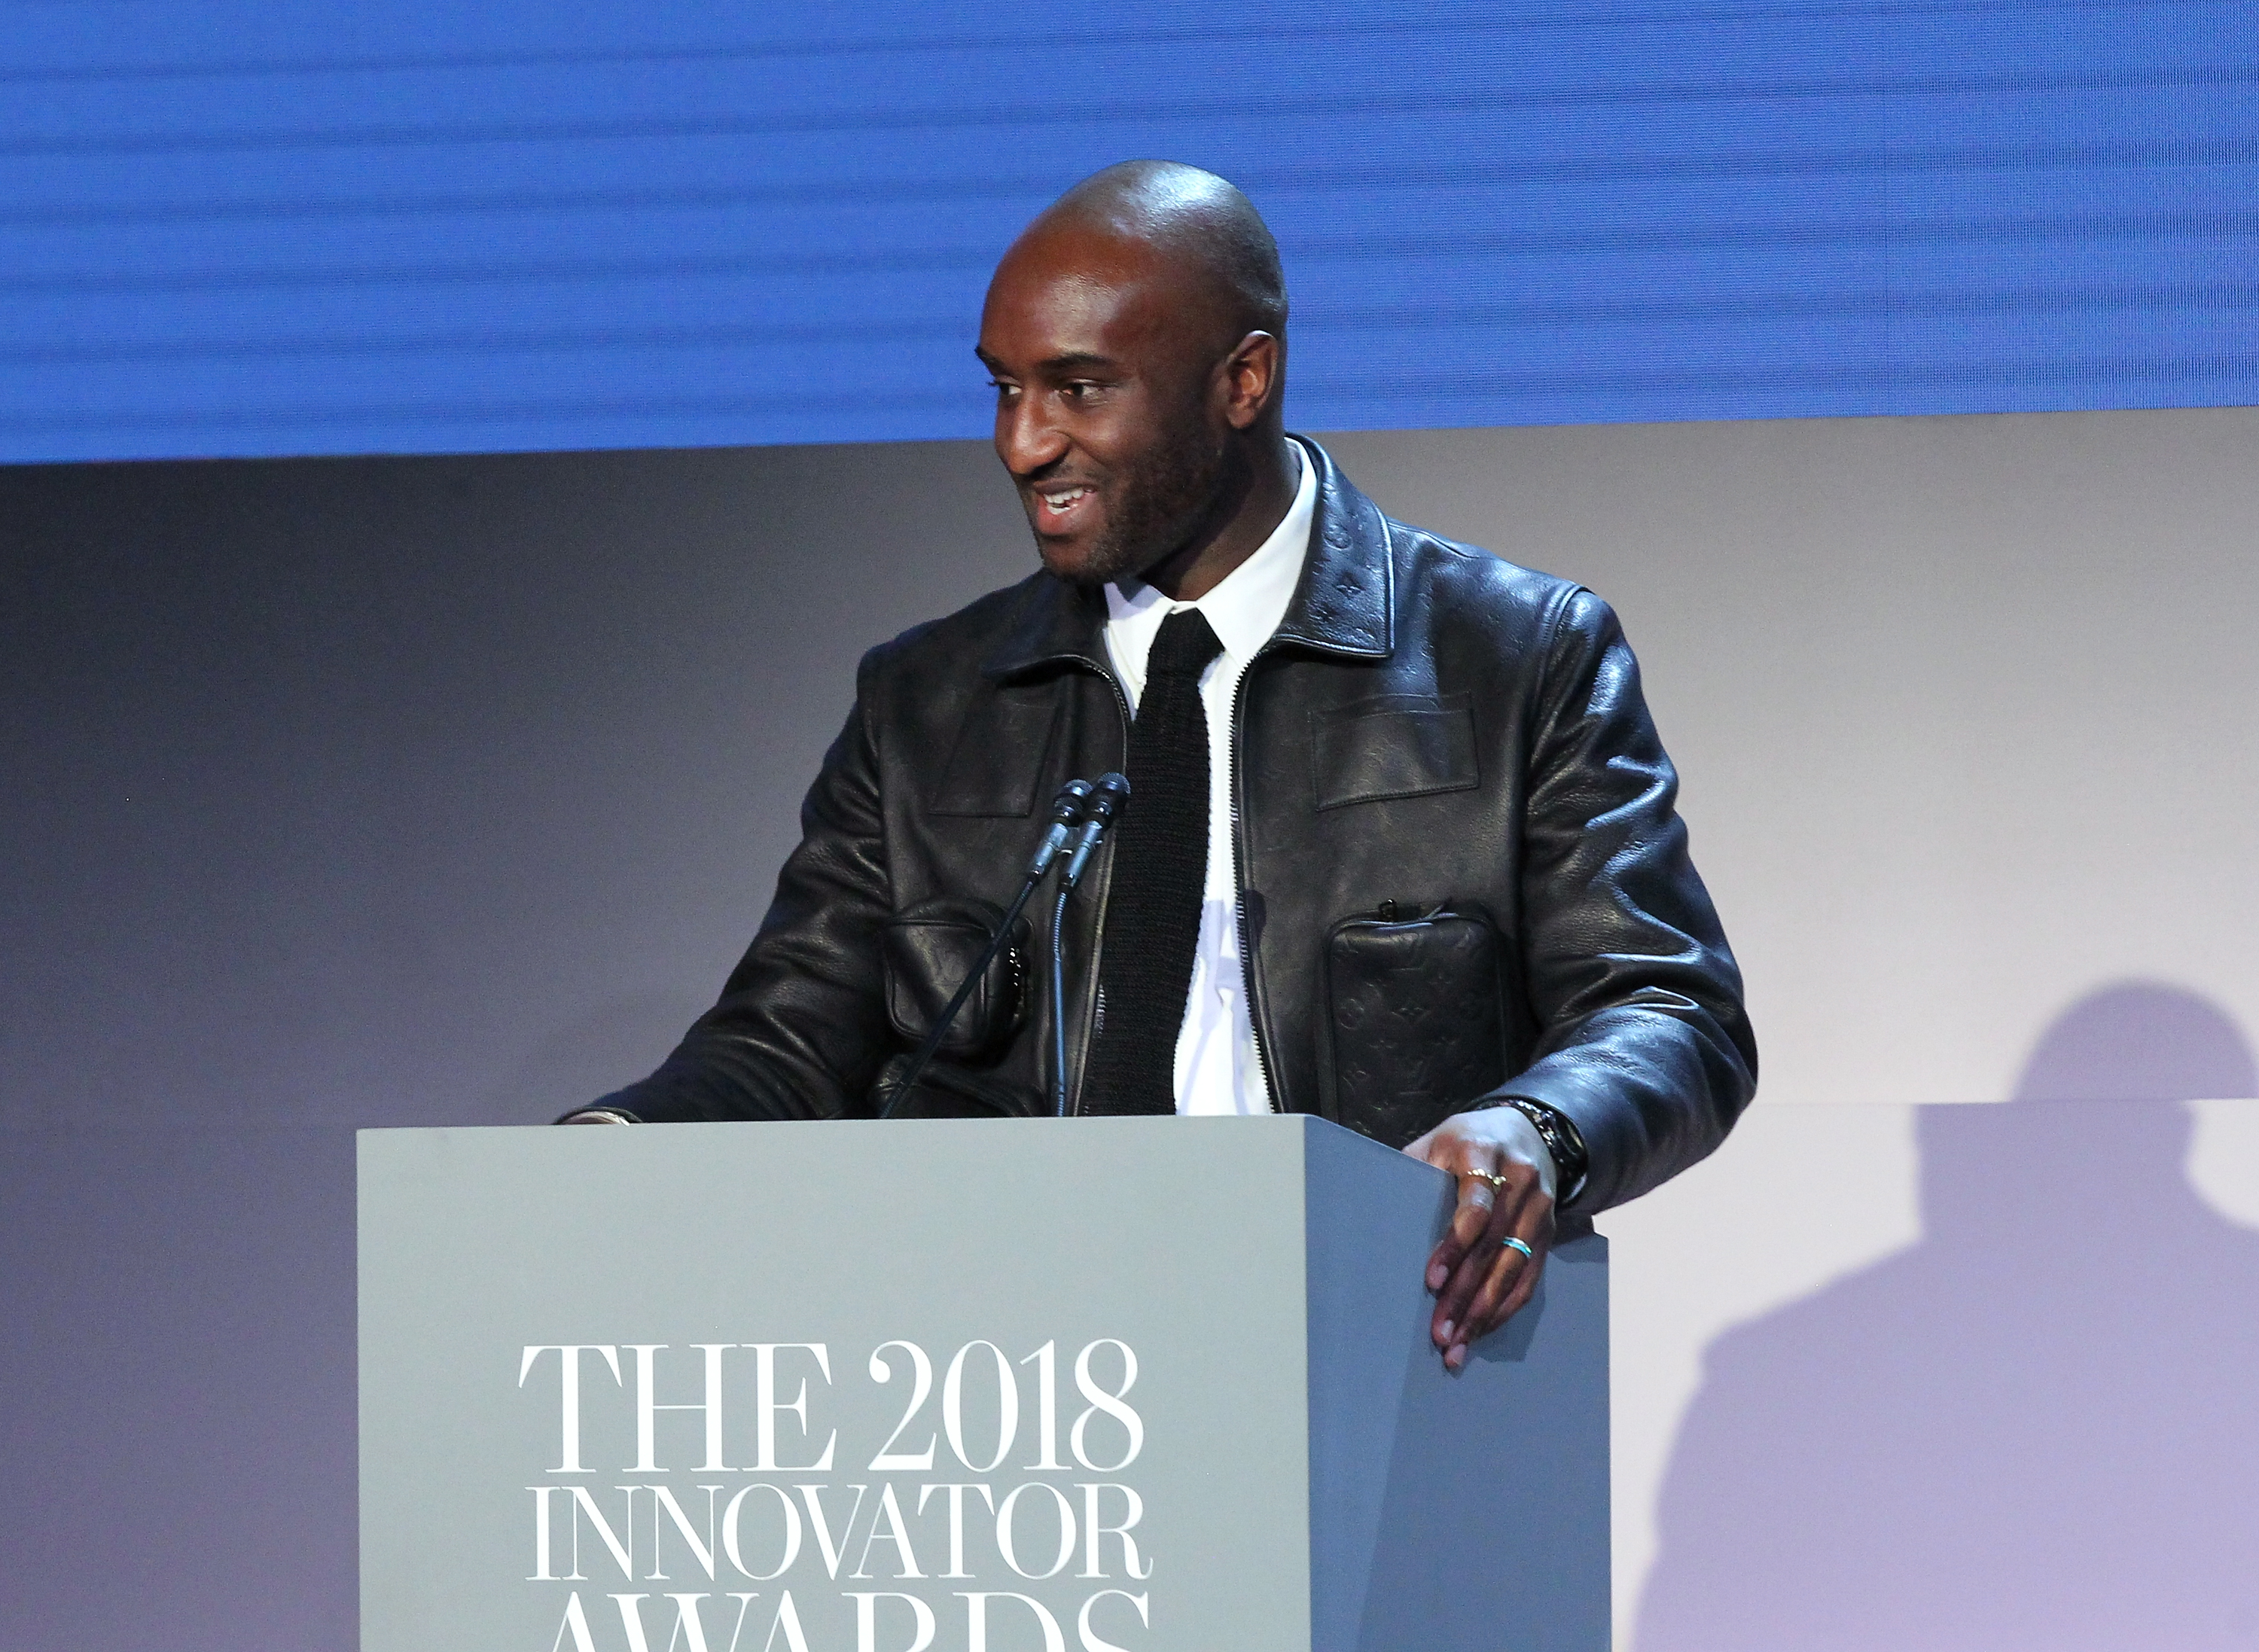 Virgil Abloh Is in the Midst of Backlash for Lack of Diversity on His Off- White Staff [UPDATED] - Fashionista